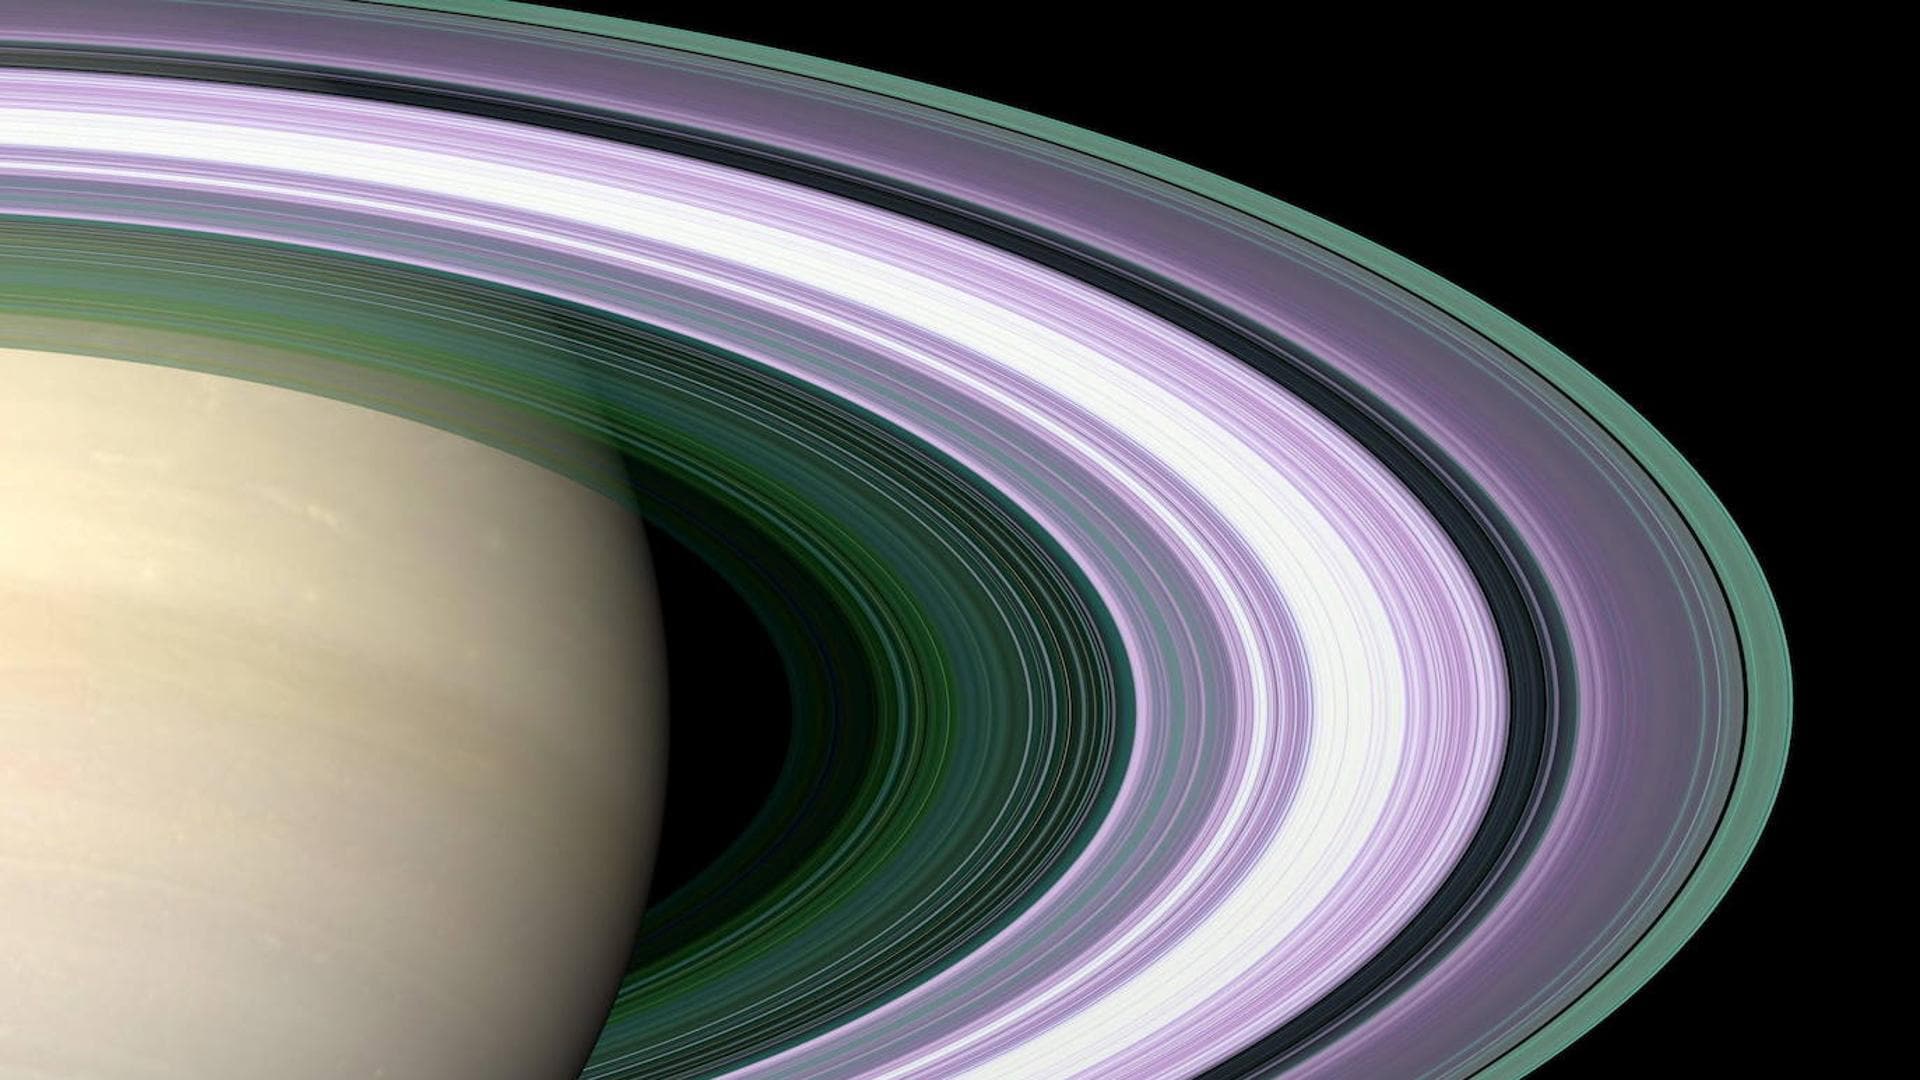 They adjust the age of Saturn's rings: neither so 'old' as the planet nor so 'young' as to be only 100 million years old